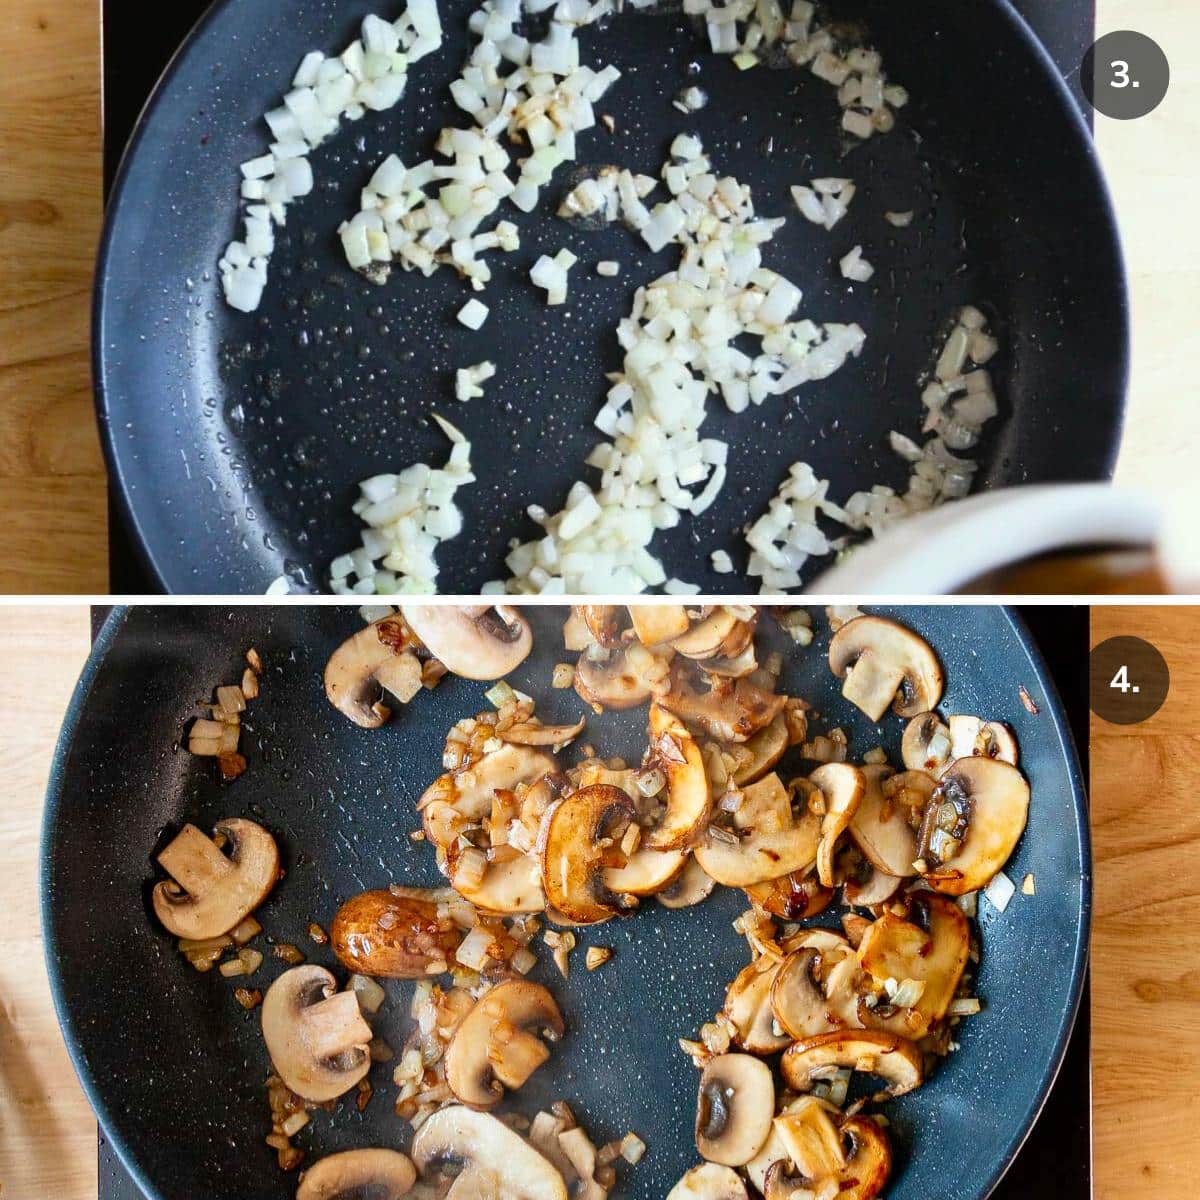 Pan frying onions and mushrooms in bacon fat. 